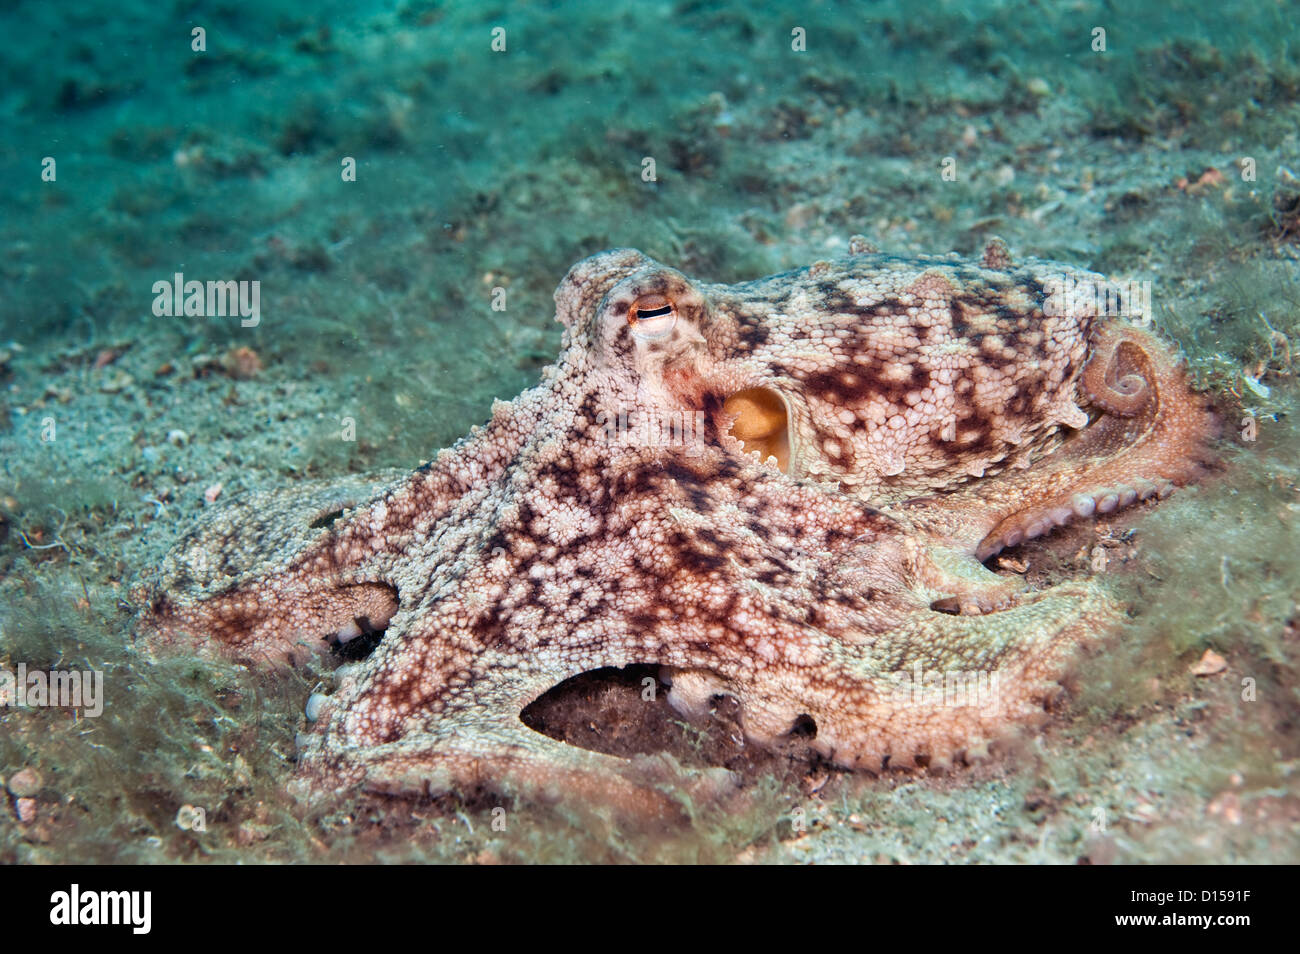 A Common Octopus, Octopus vulgaris, photographed on the bottom of the Lake Worth Lagoon in Singer Island, Florida, United States Stock Photo